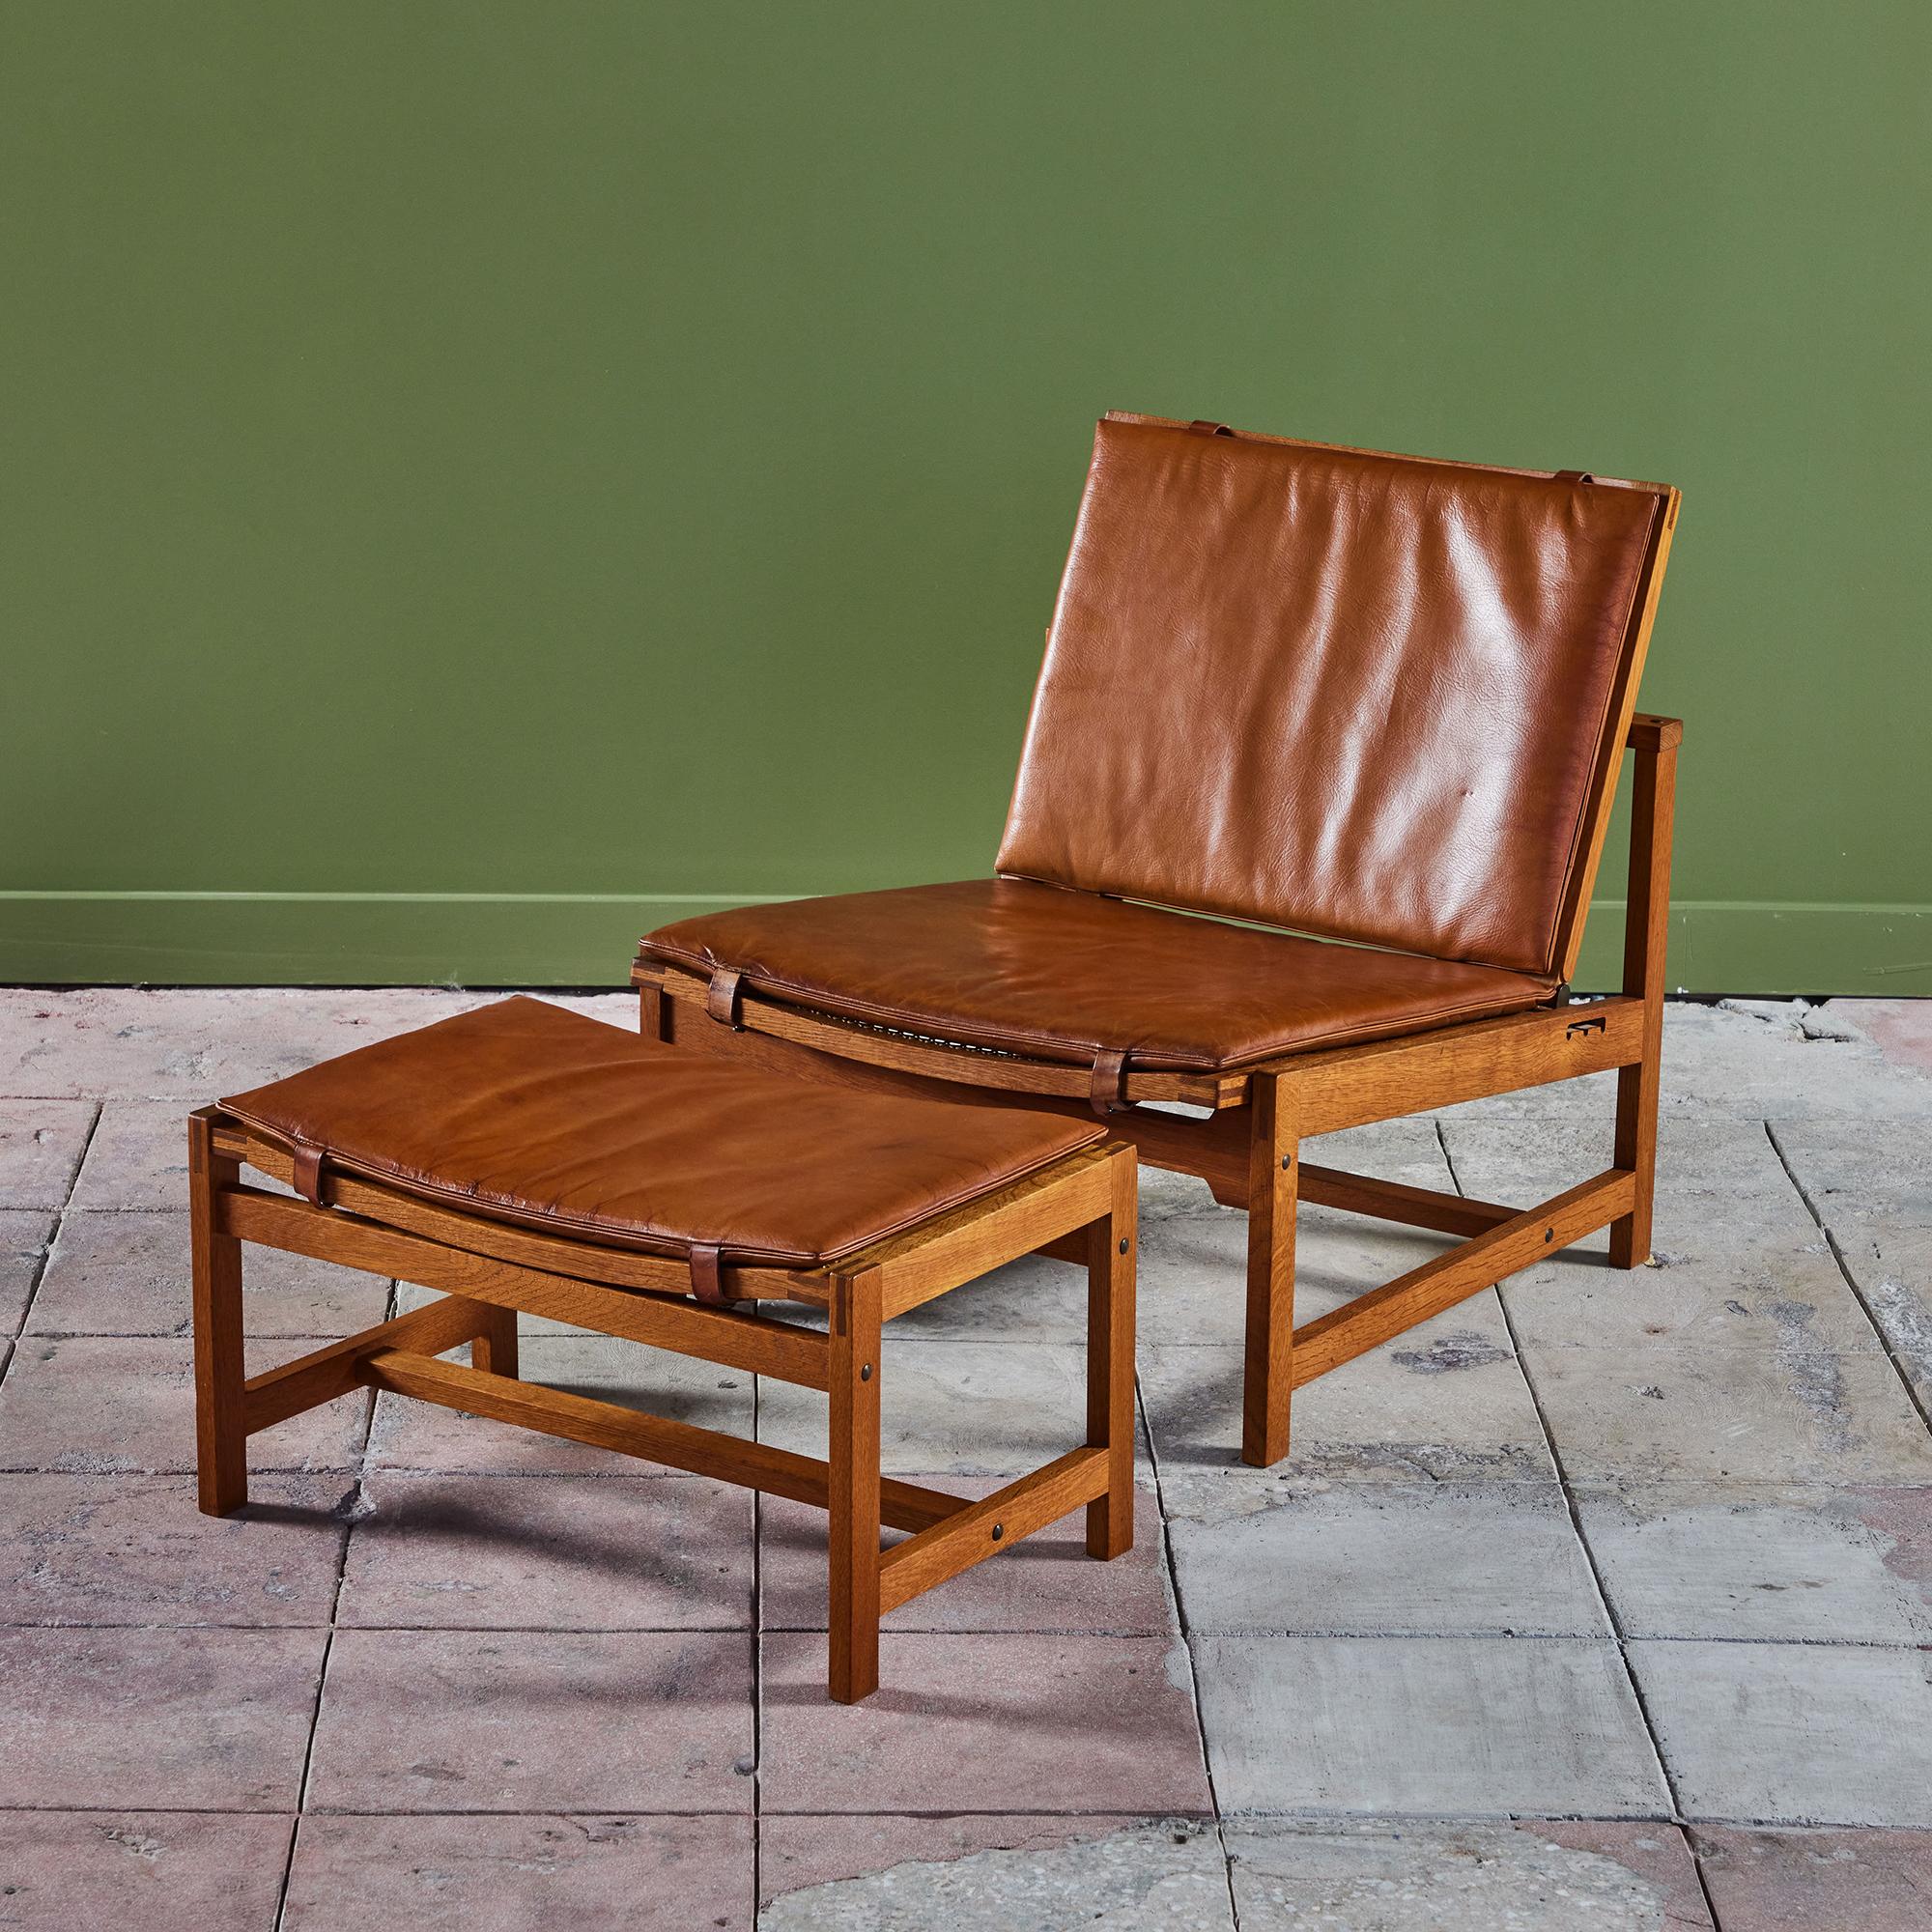 Oak and leather lounge chair and ottoman set by Arne Karlsen and Peter Hjort, for Interna, c.1960s. The chair features an adjustable seat back and an oak frame. The cane lounge chair and ottoman both have the original cognac leather